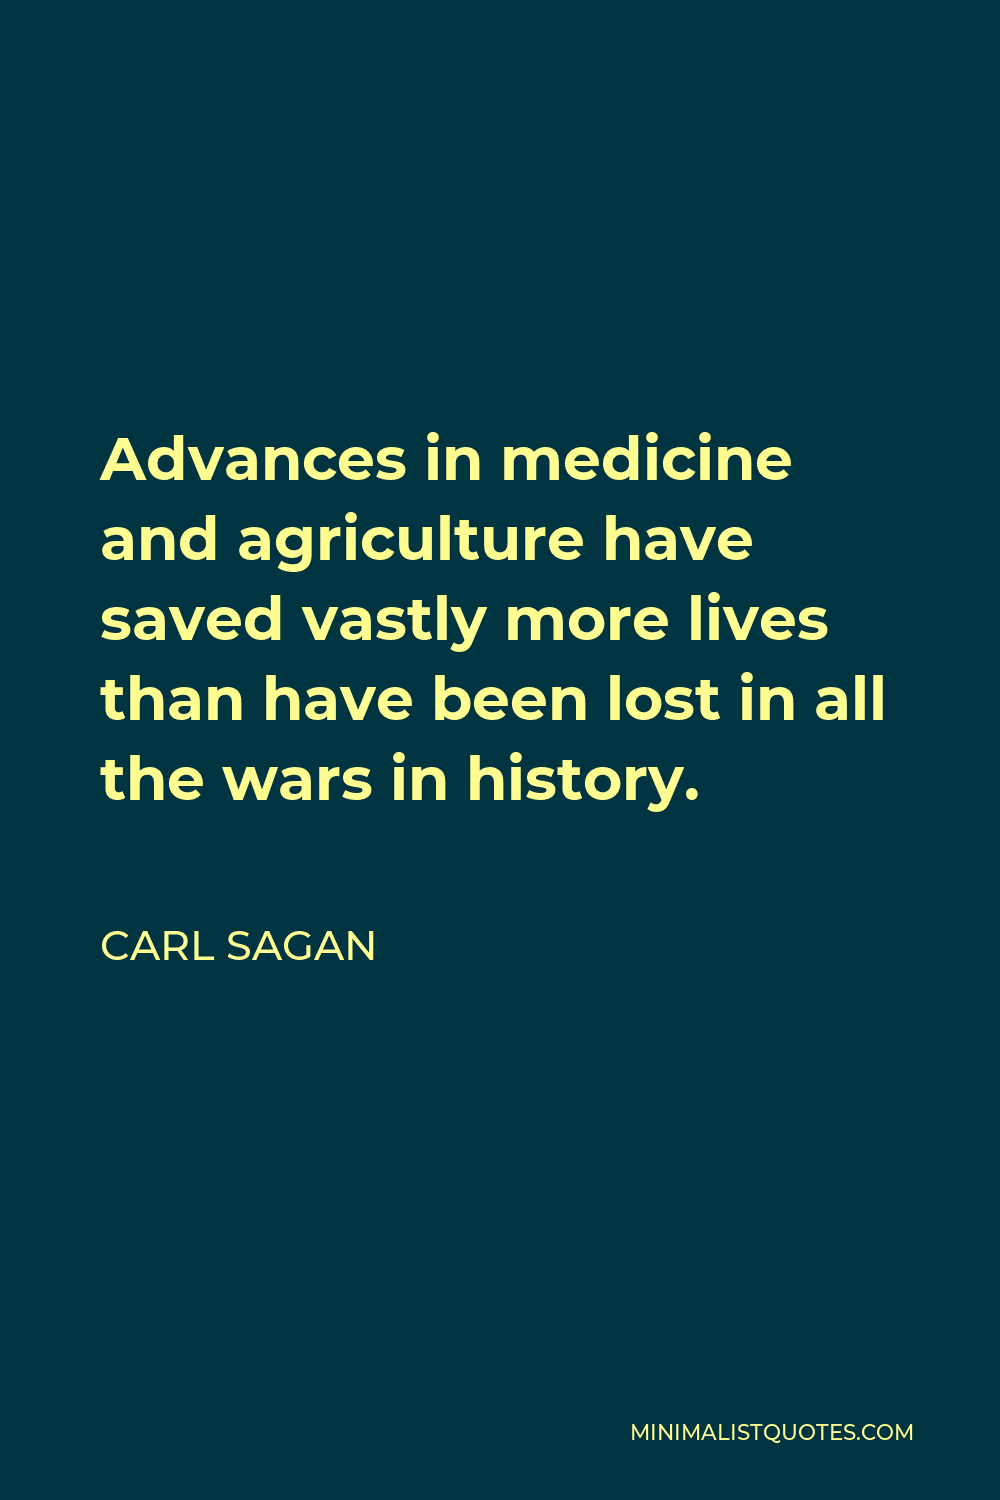 Carl Sagan Quote - Advances in medicine and agriculture have saved vastly more lives than have been lost in all the wars in history.